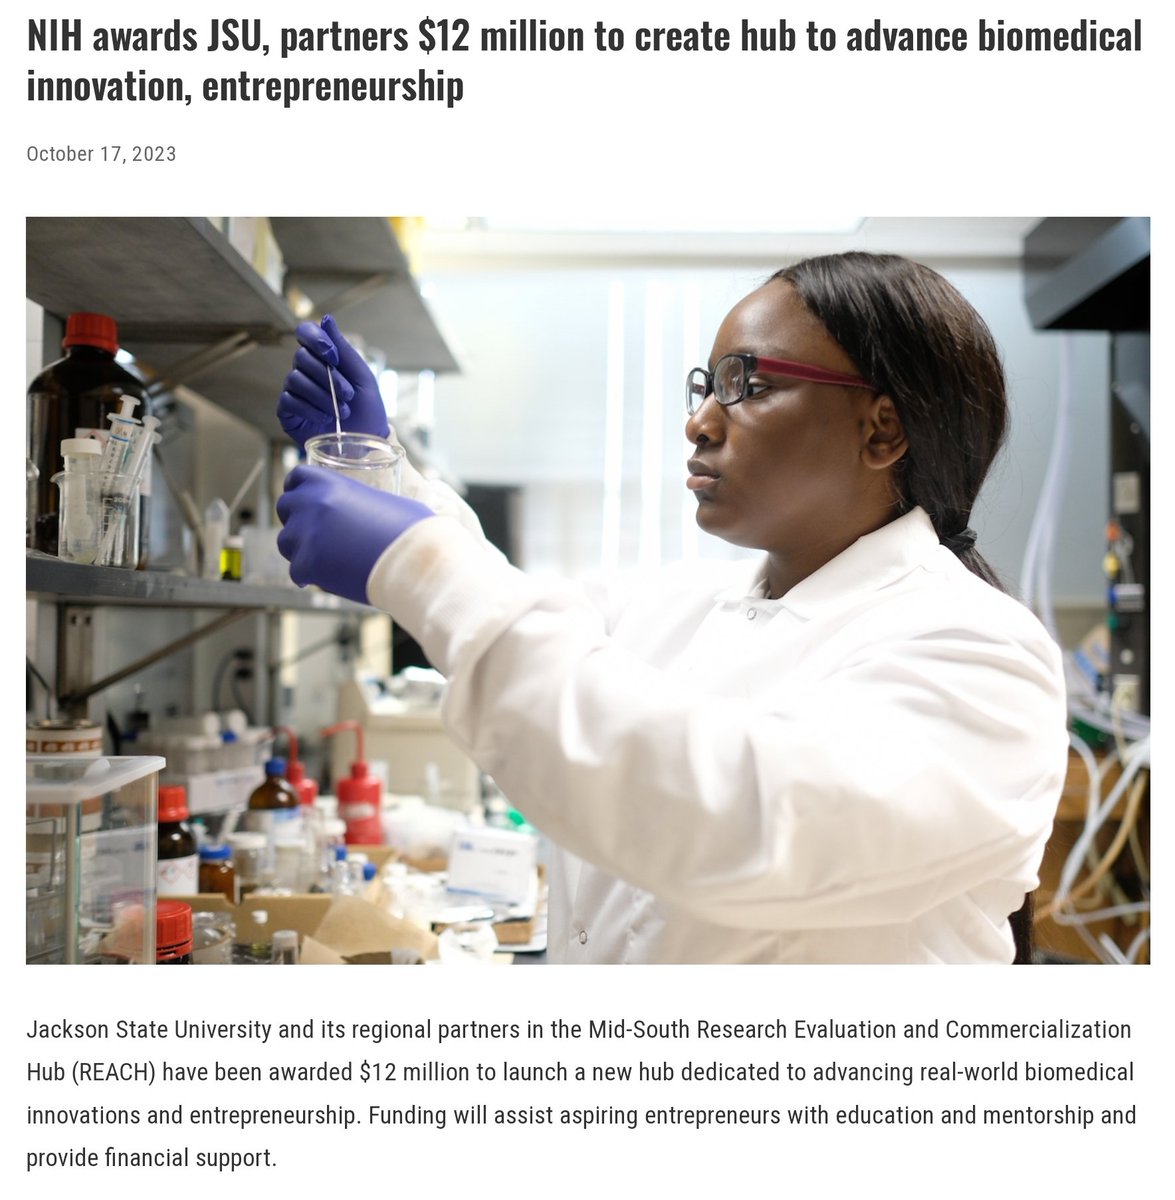 #JSUElevate: Jackson State University has been awarded a $12 million grant from the NIH.